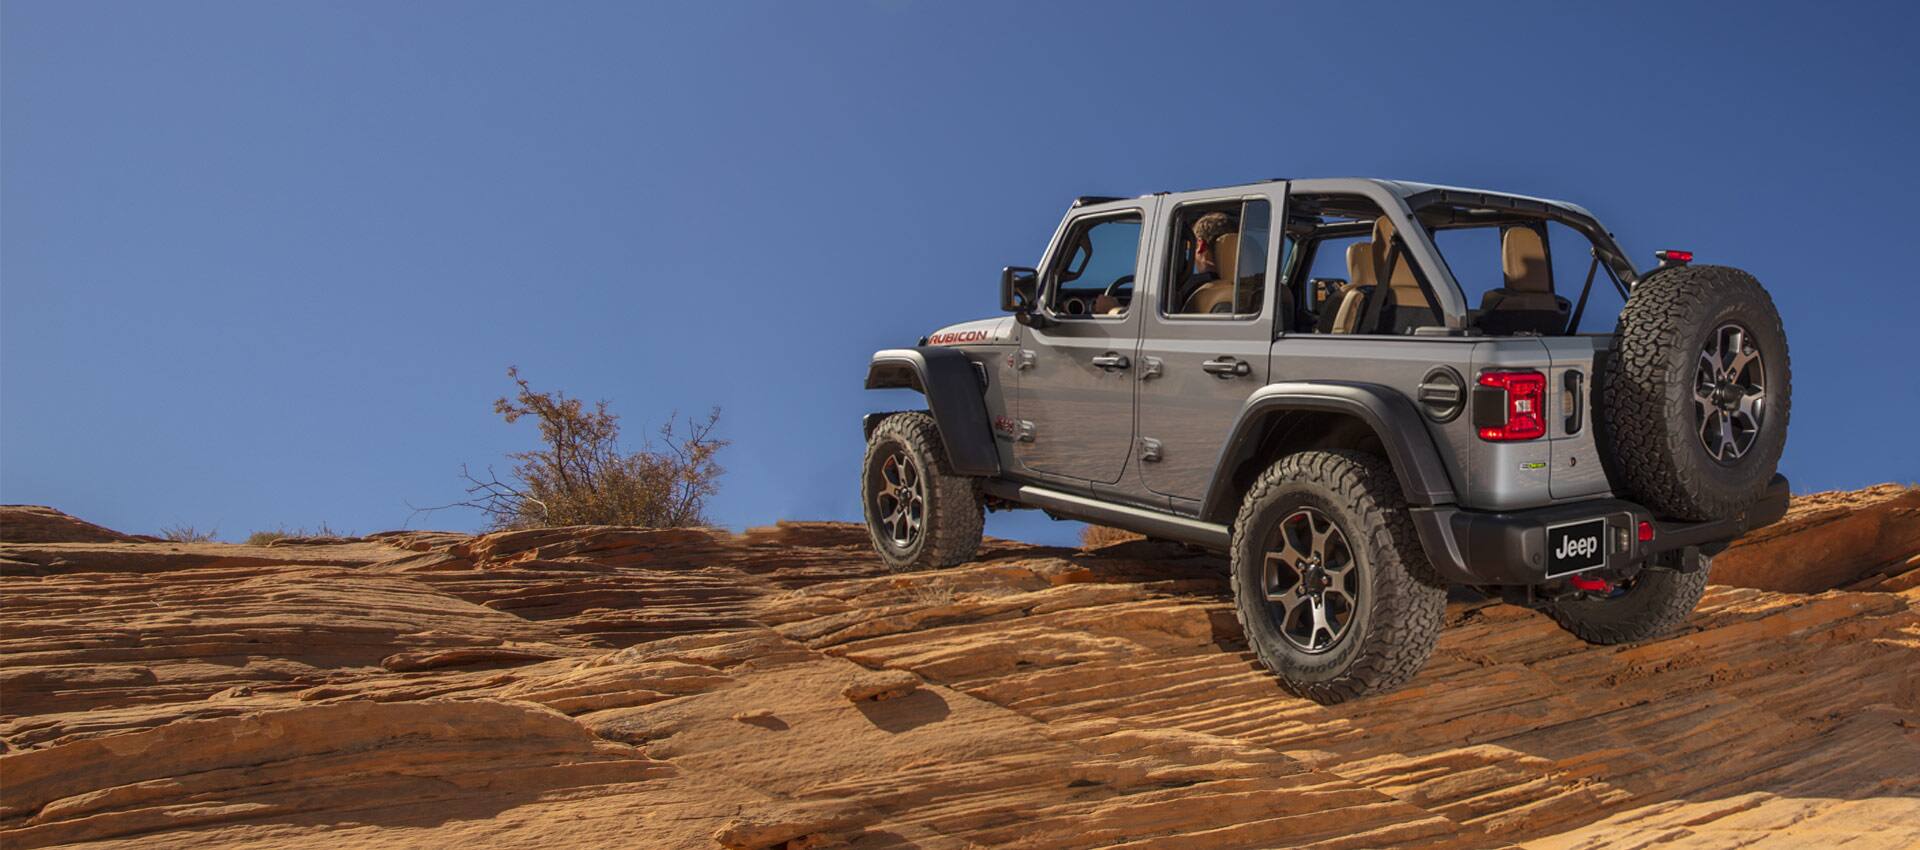 The 2022 Jeep Wrangler Rubicon with its top removed, being driven off-road on a red shale rock formation.